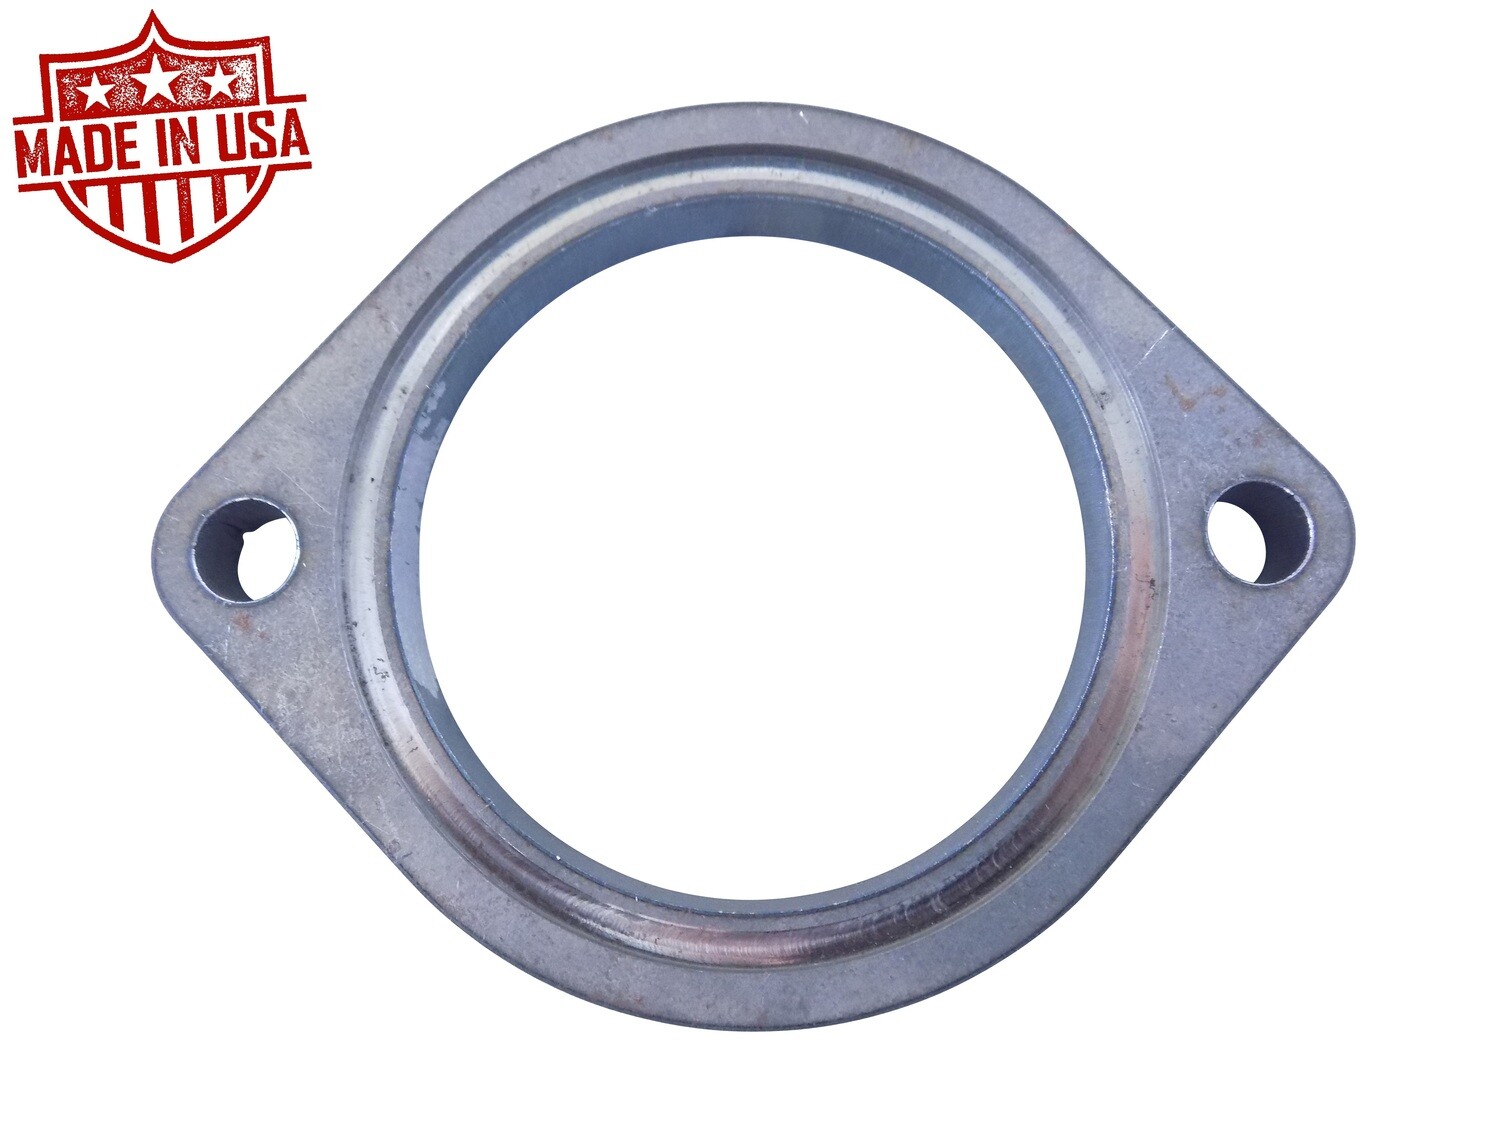 Cold Side Y-Bridge Inlet Flange with O-ring for 6.6l LLY 2005 Chevy GMC